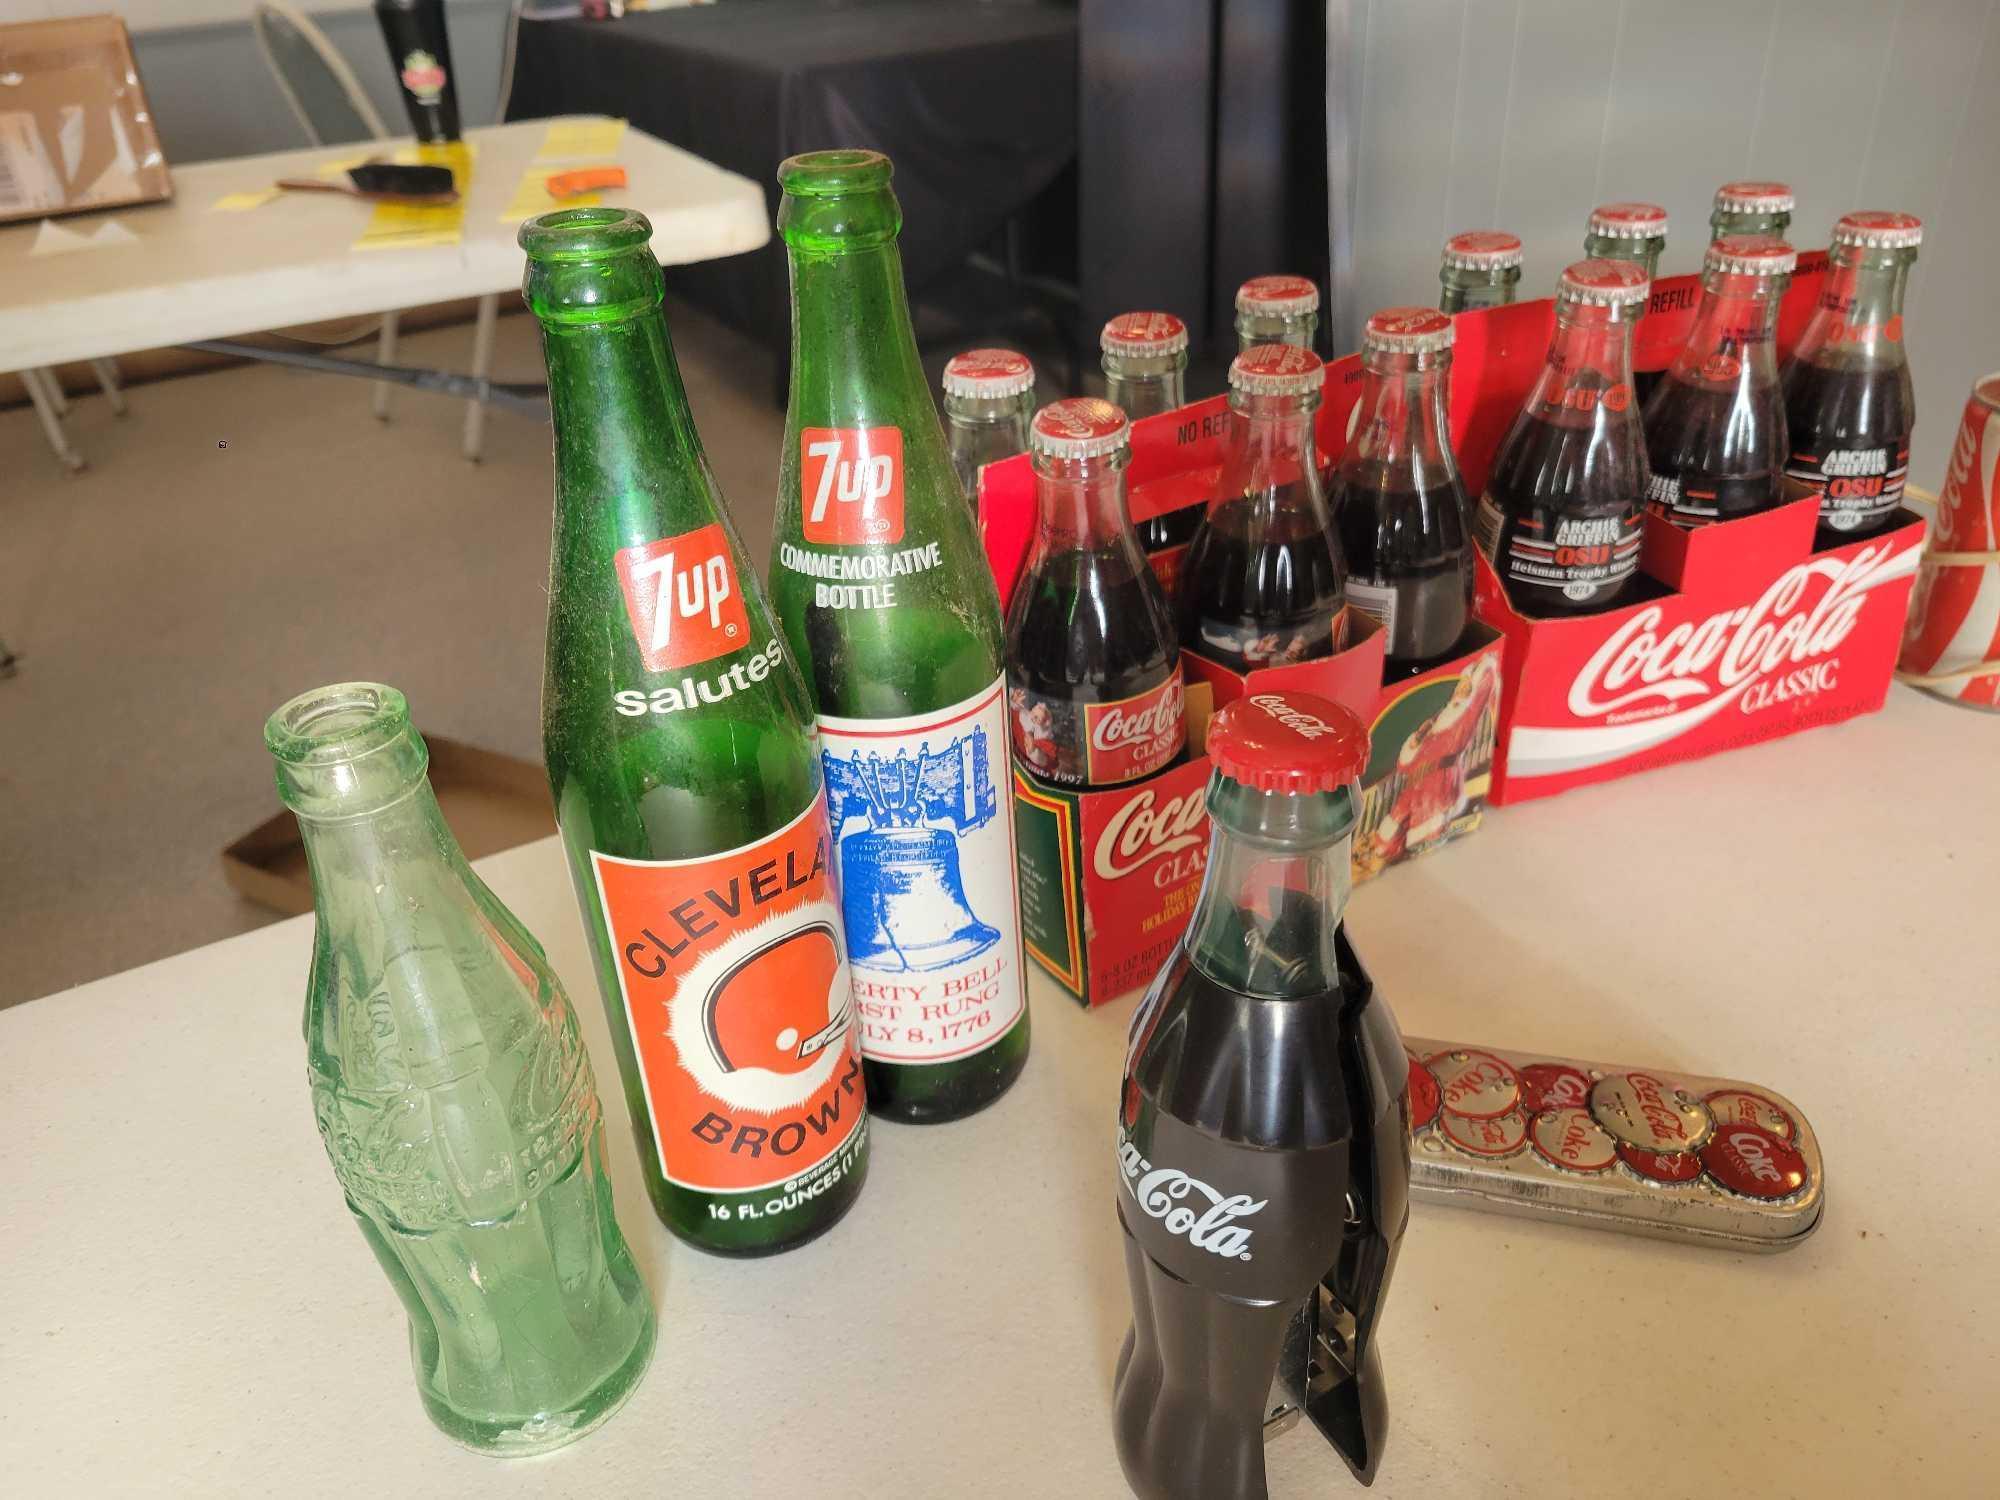 Collectible Coca Cola bottles, 7Up, Coke lamp and decor